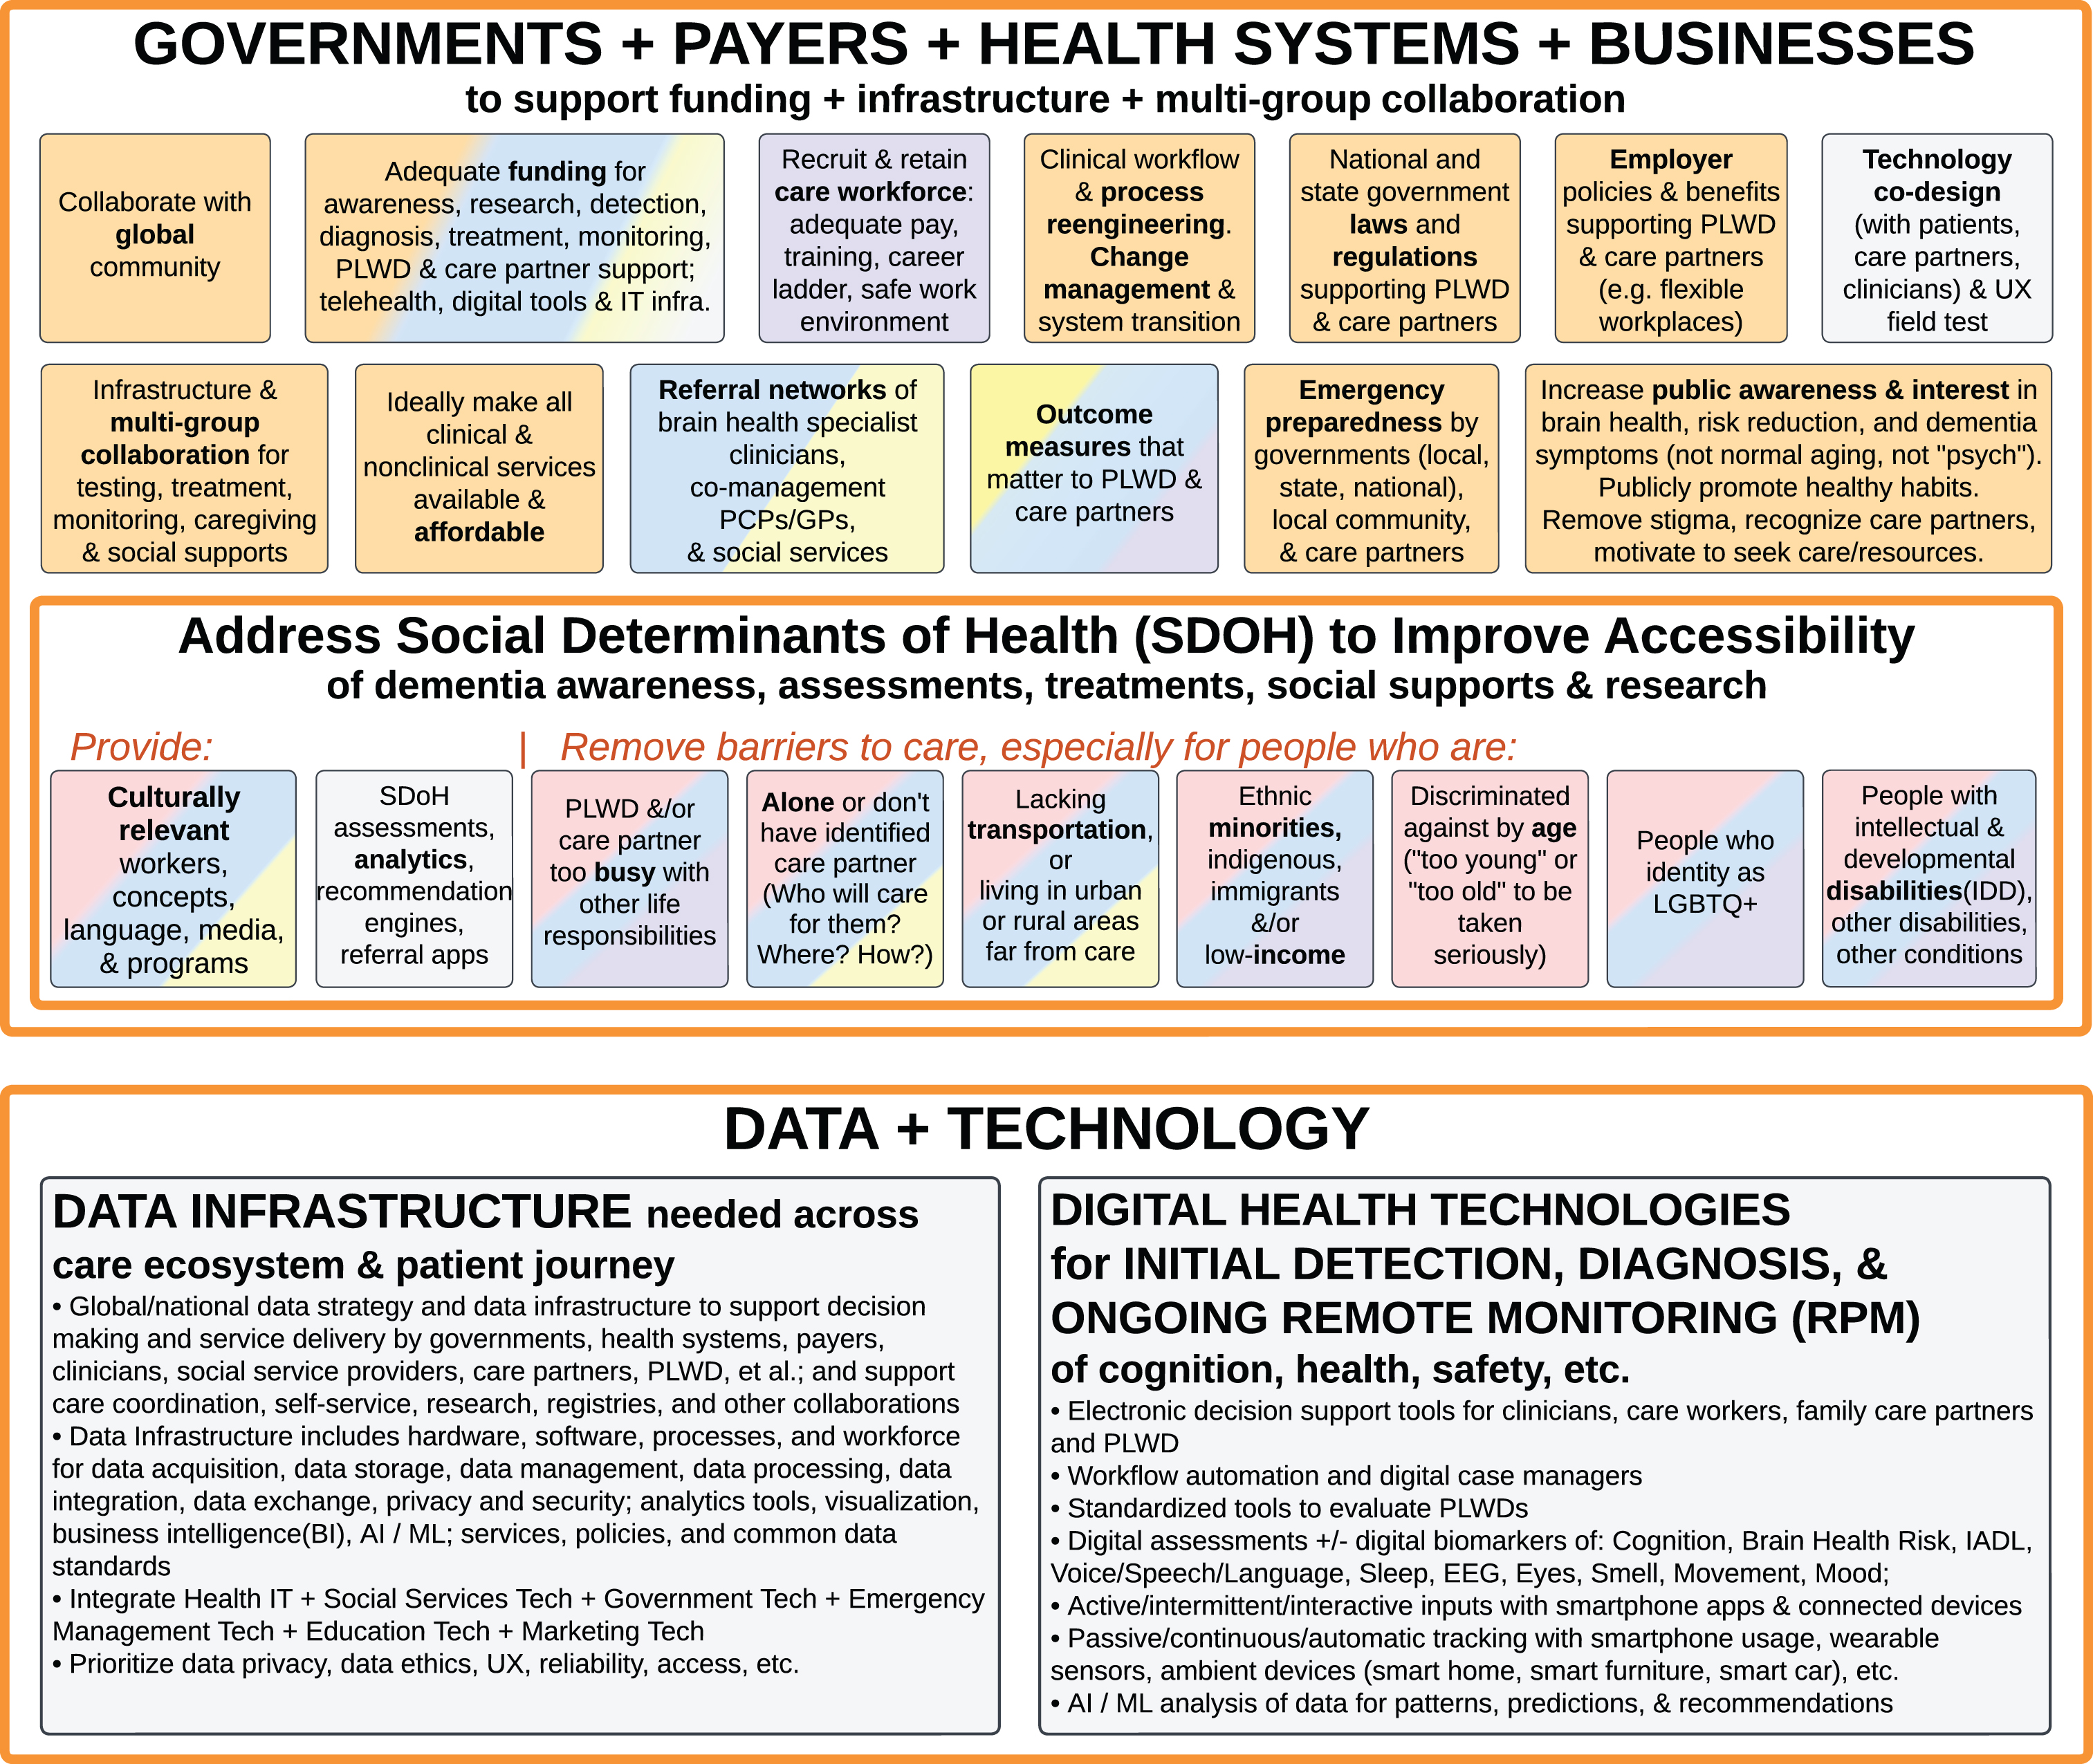 Foundational Infrastructure and Enablers of Ideal Care: Governments, Payers, Health Systems, and Businesses to Support Funding, Infrastructure, and Multi-Group Collaboration (top); Address Social Determinants of Health to Improve Accessibility (middle); Data Infrastructure and Digital Health Technologies for Initial Detection, Diagnosis, and Ongoing Remote Patient Monitoring (bottom).